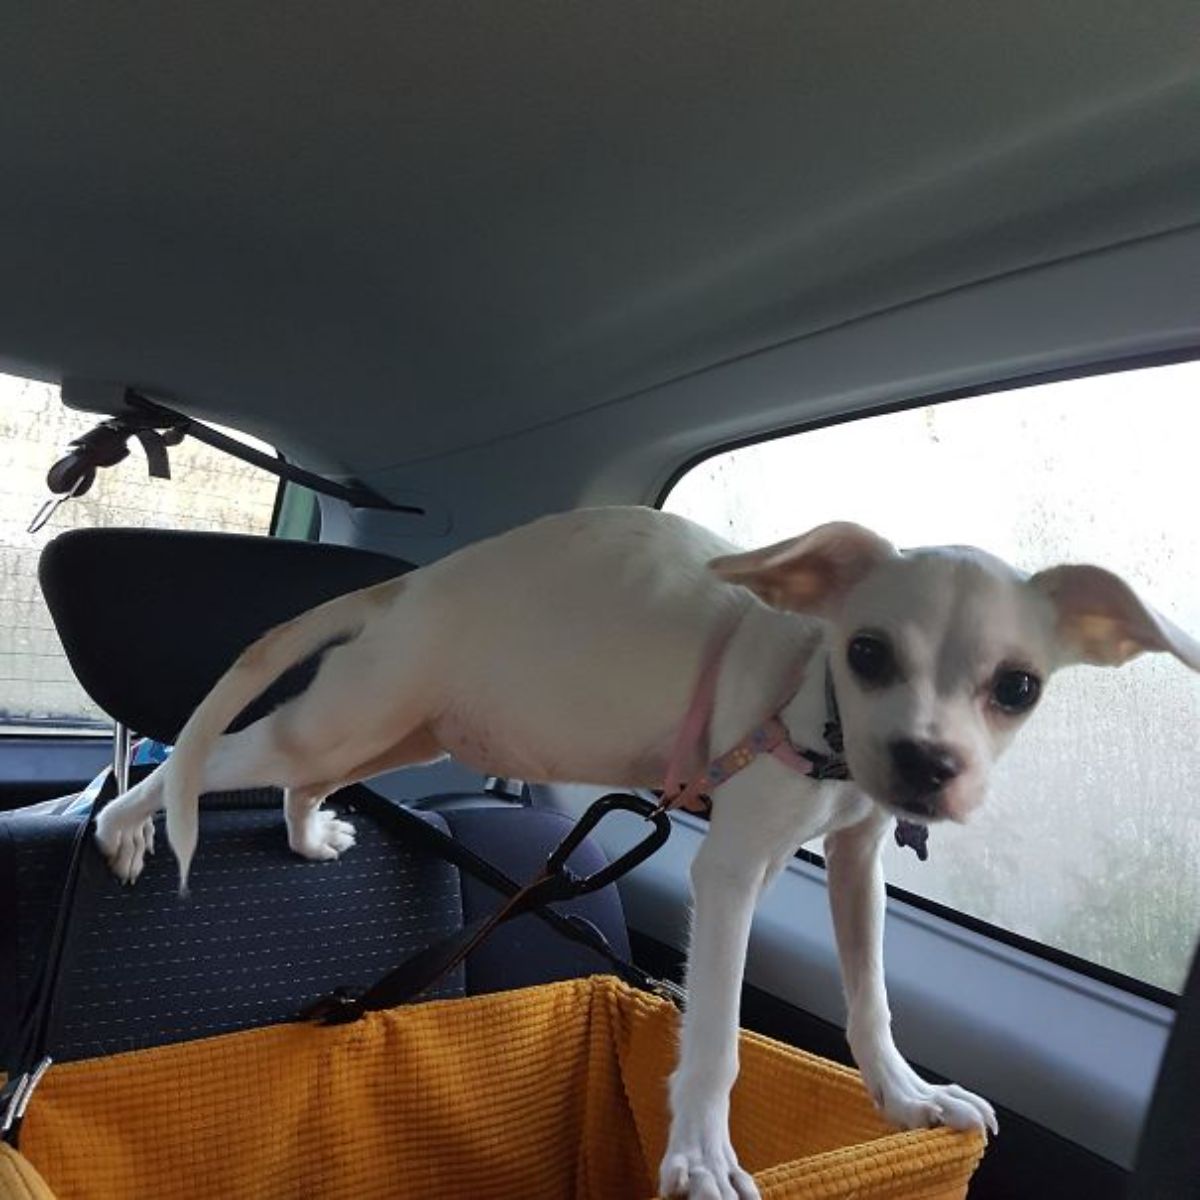 small white dog inside a vehicle with the back legs on the headrest and the front paws on the edge of a yellow carrier